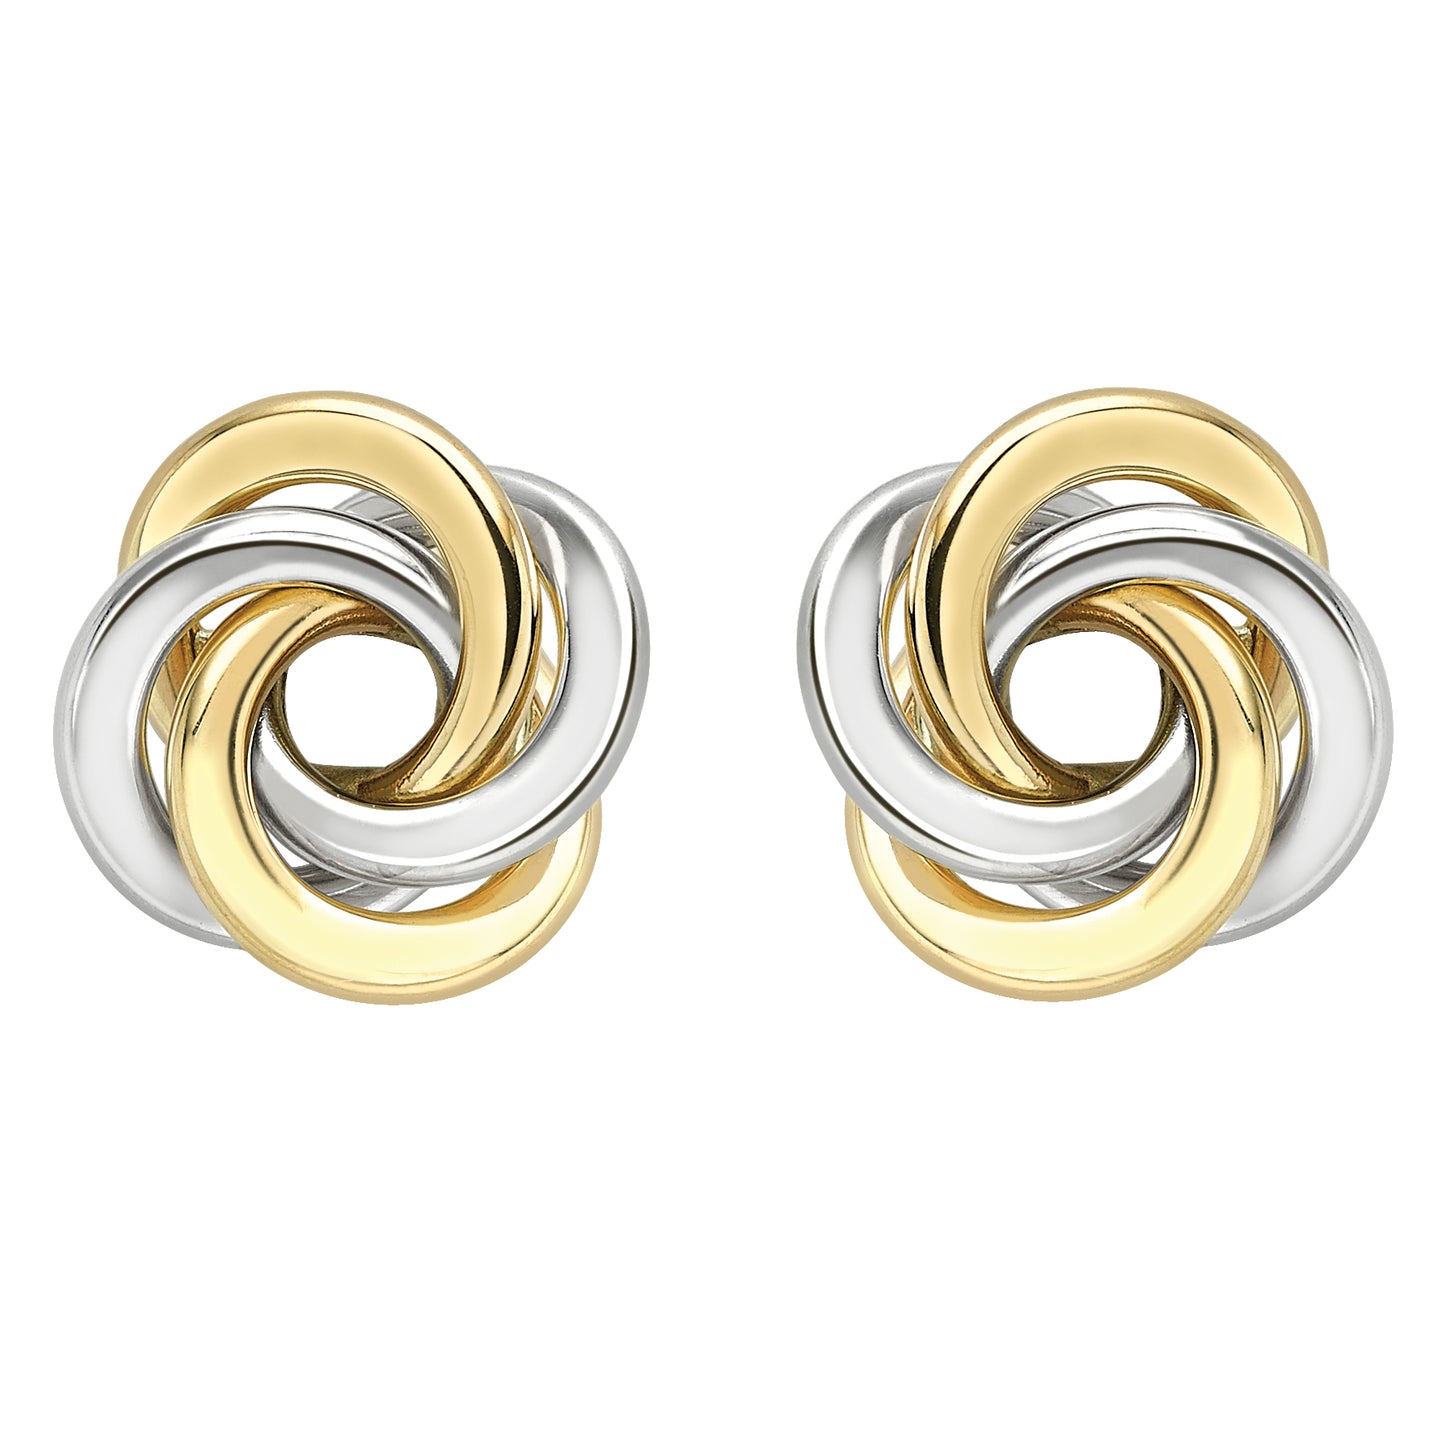 9ct White & Yellow Gold  Whirlpool Knot Stud Earrings - ERNR02125